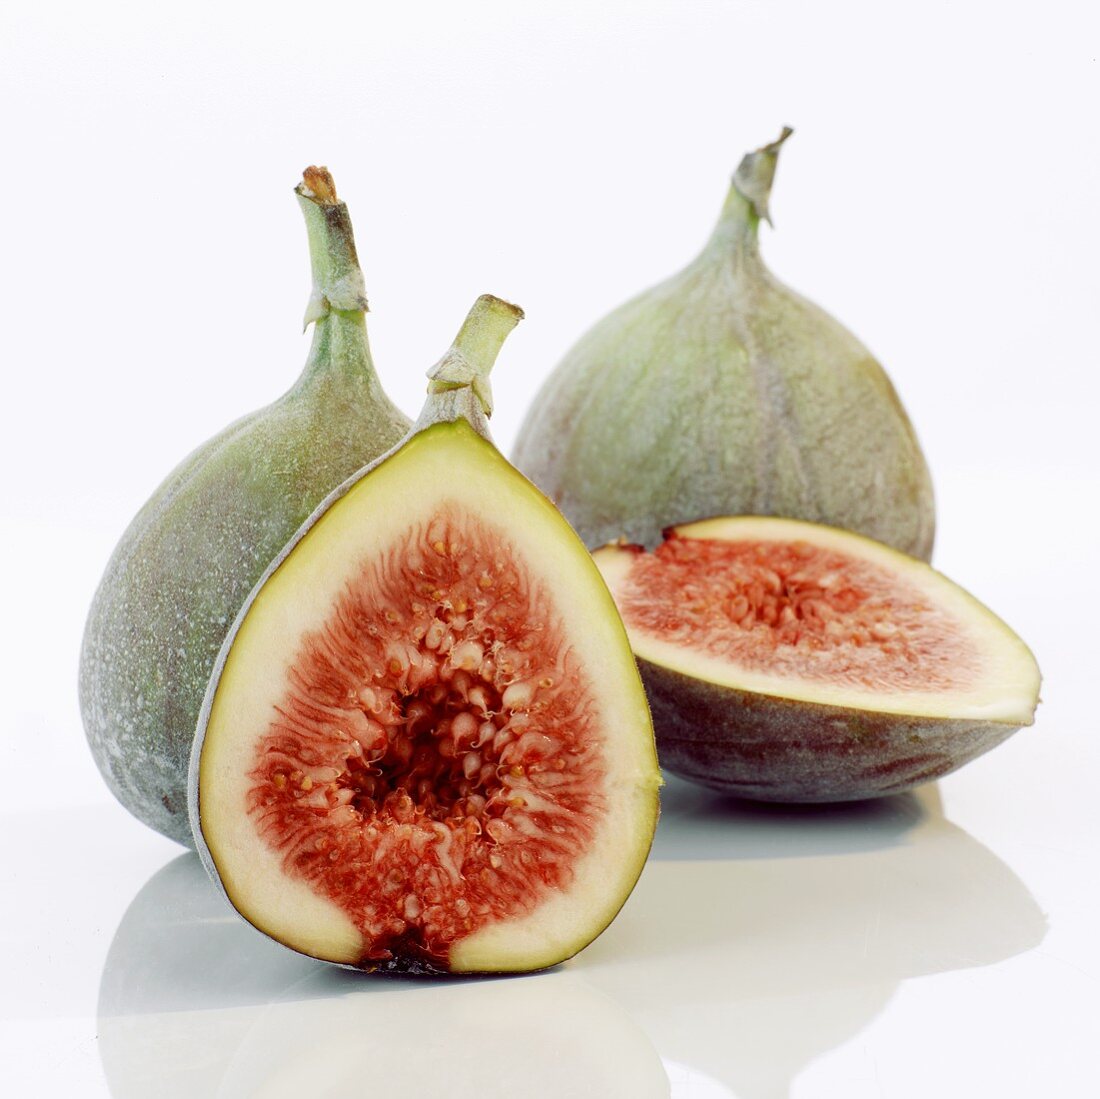 Fresh figs, whole and cut open